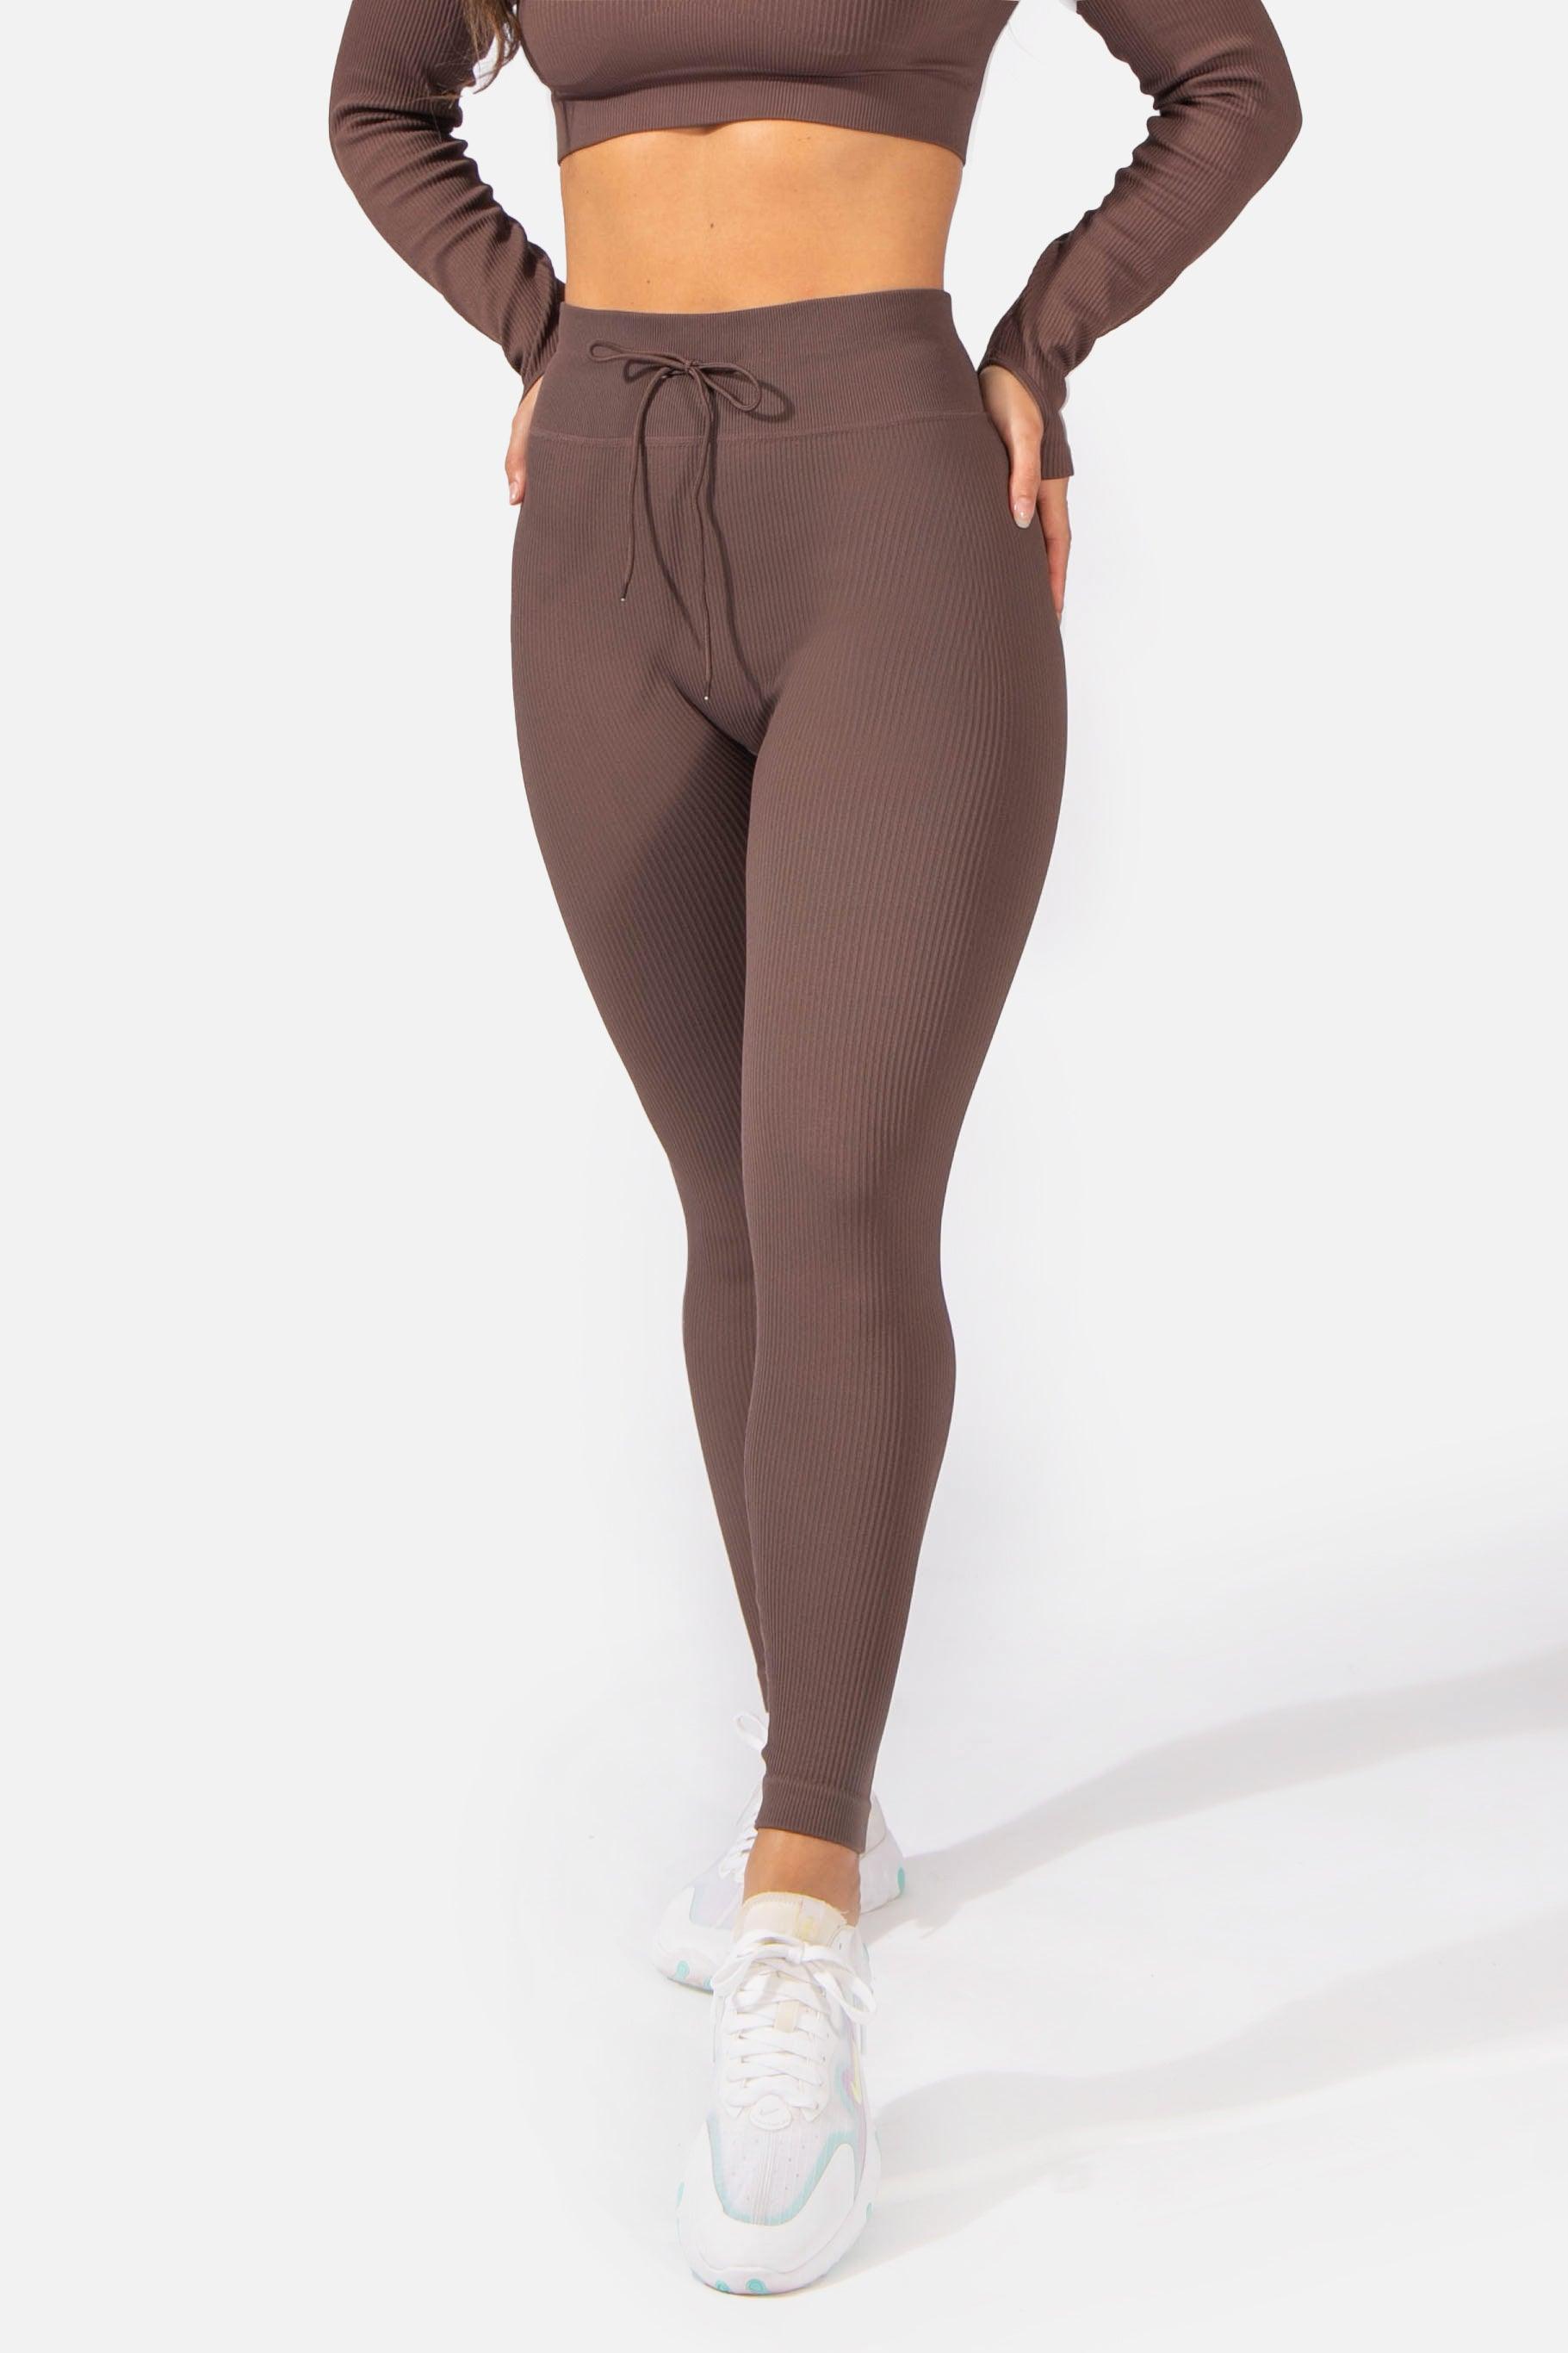 Official High Waisted Thick Ribbed Leggings  Ribbed leggings, Beige  leggings, Thick leggings